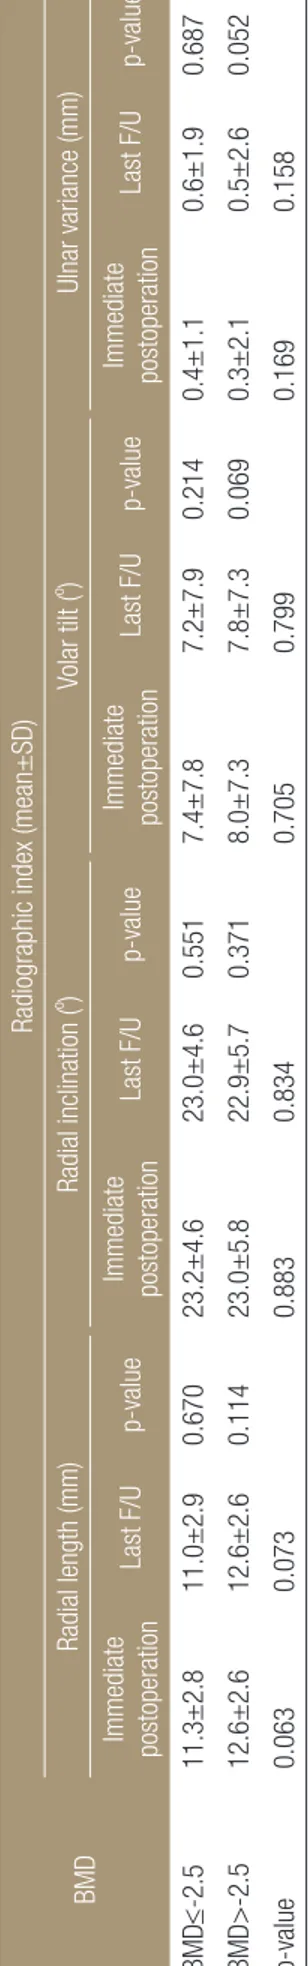 Table 6. Radiological Results of Radiographic Index according to Fracture Type AO classification